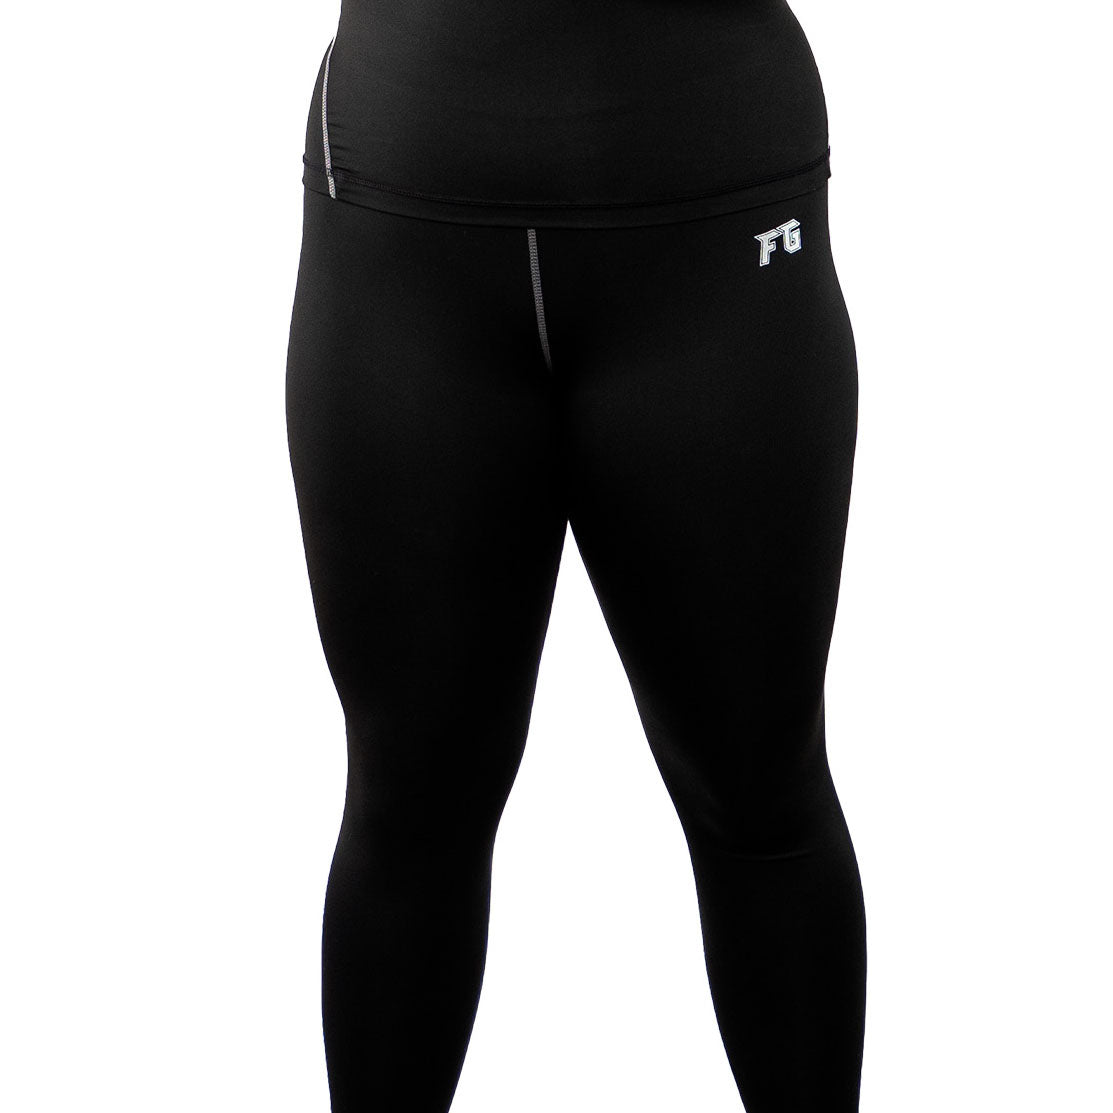 FG Pro On-Field Compression Pants - Adult Female